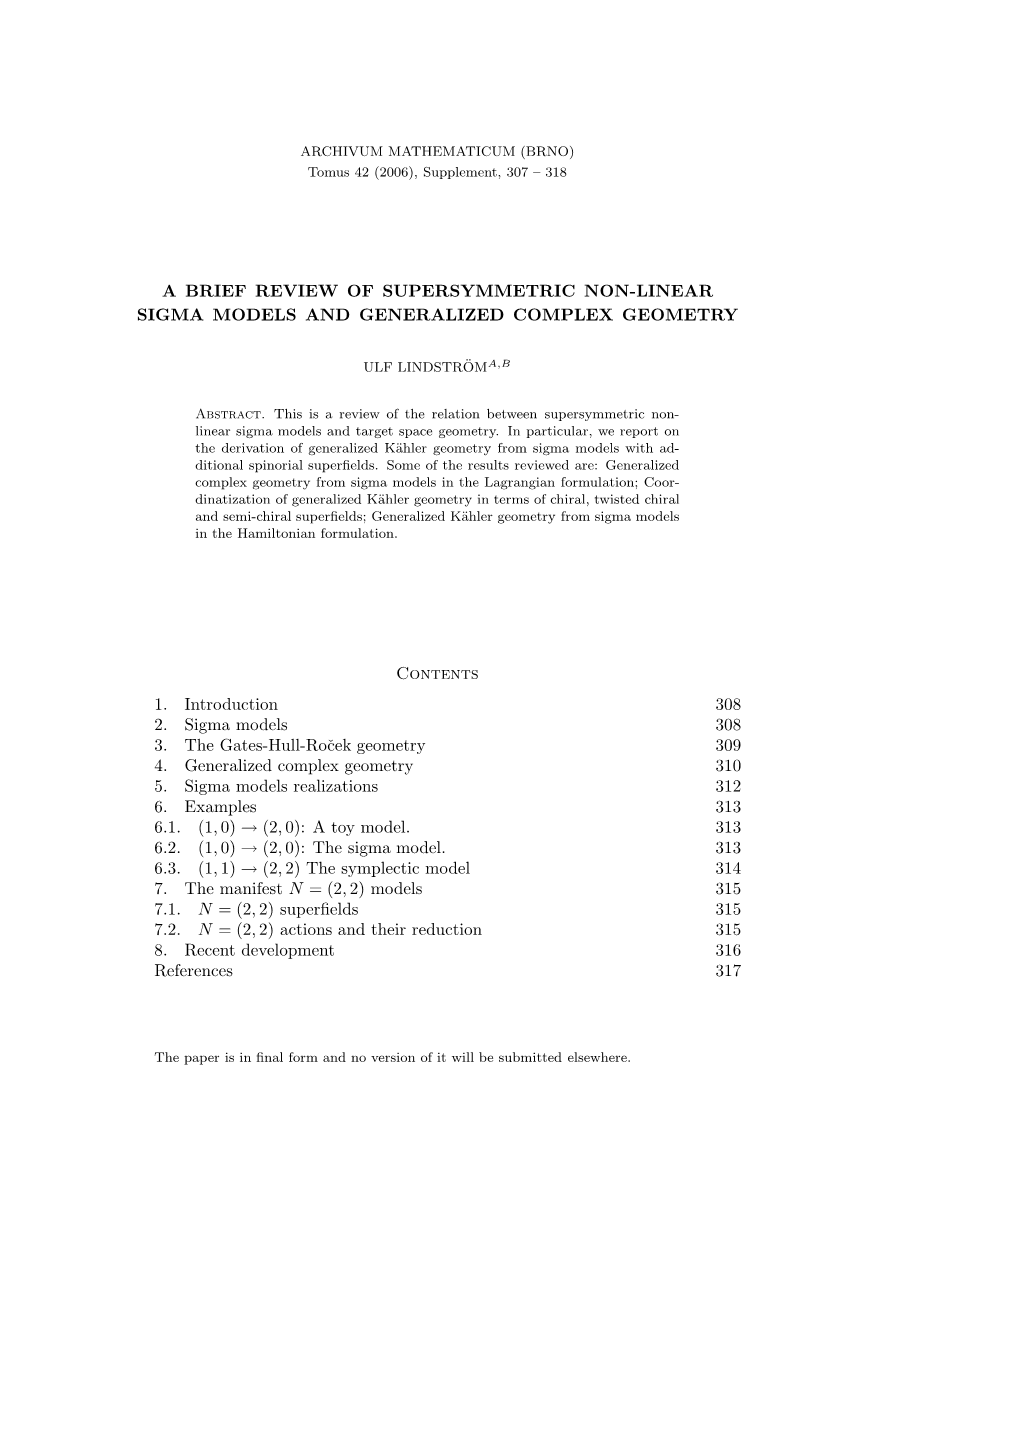 A Brief Review of Supersymmetric Non-Linear Sigma Models and Generalized Complex Geometry